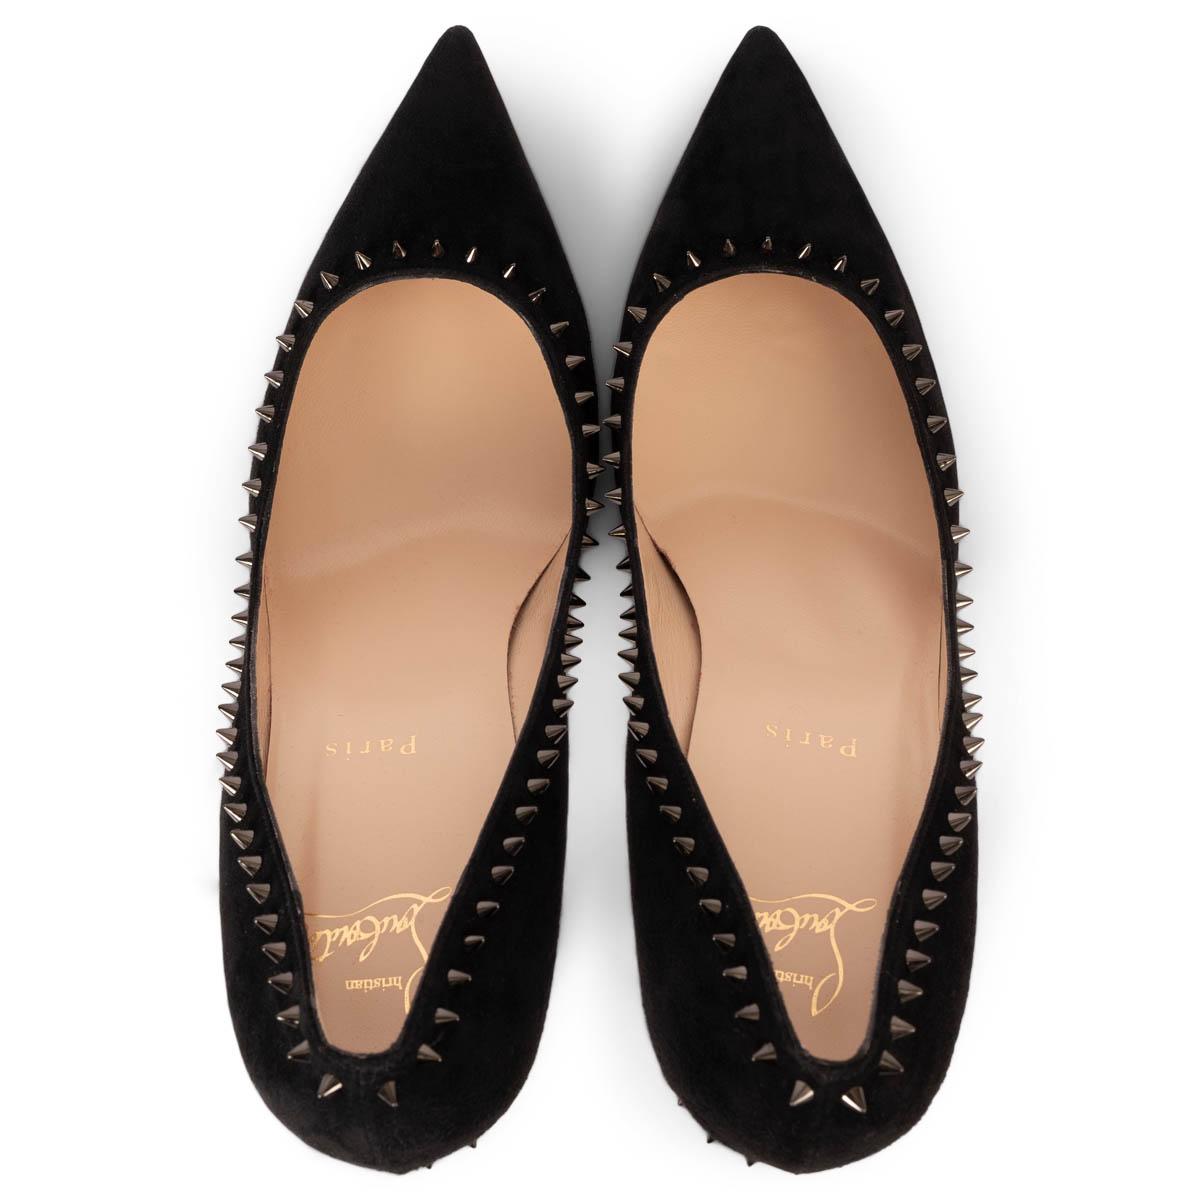 CHRISTIAN LOUBOUTIN black suede ANJALINA 85 Pumps Shoes 39.5 For Sale 2